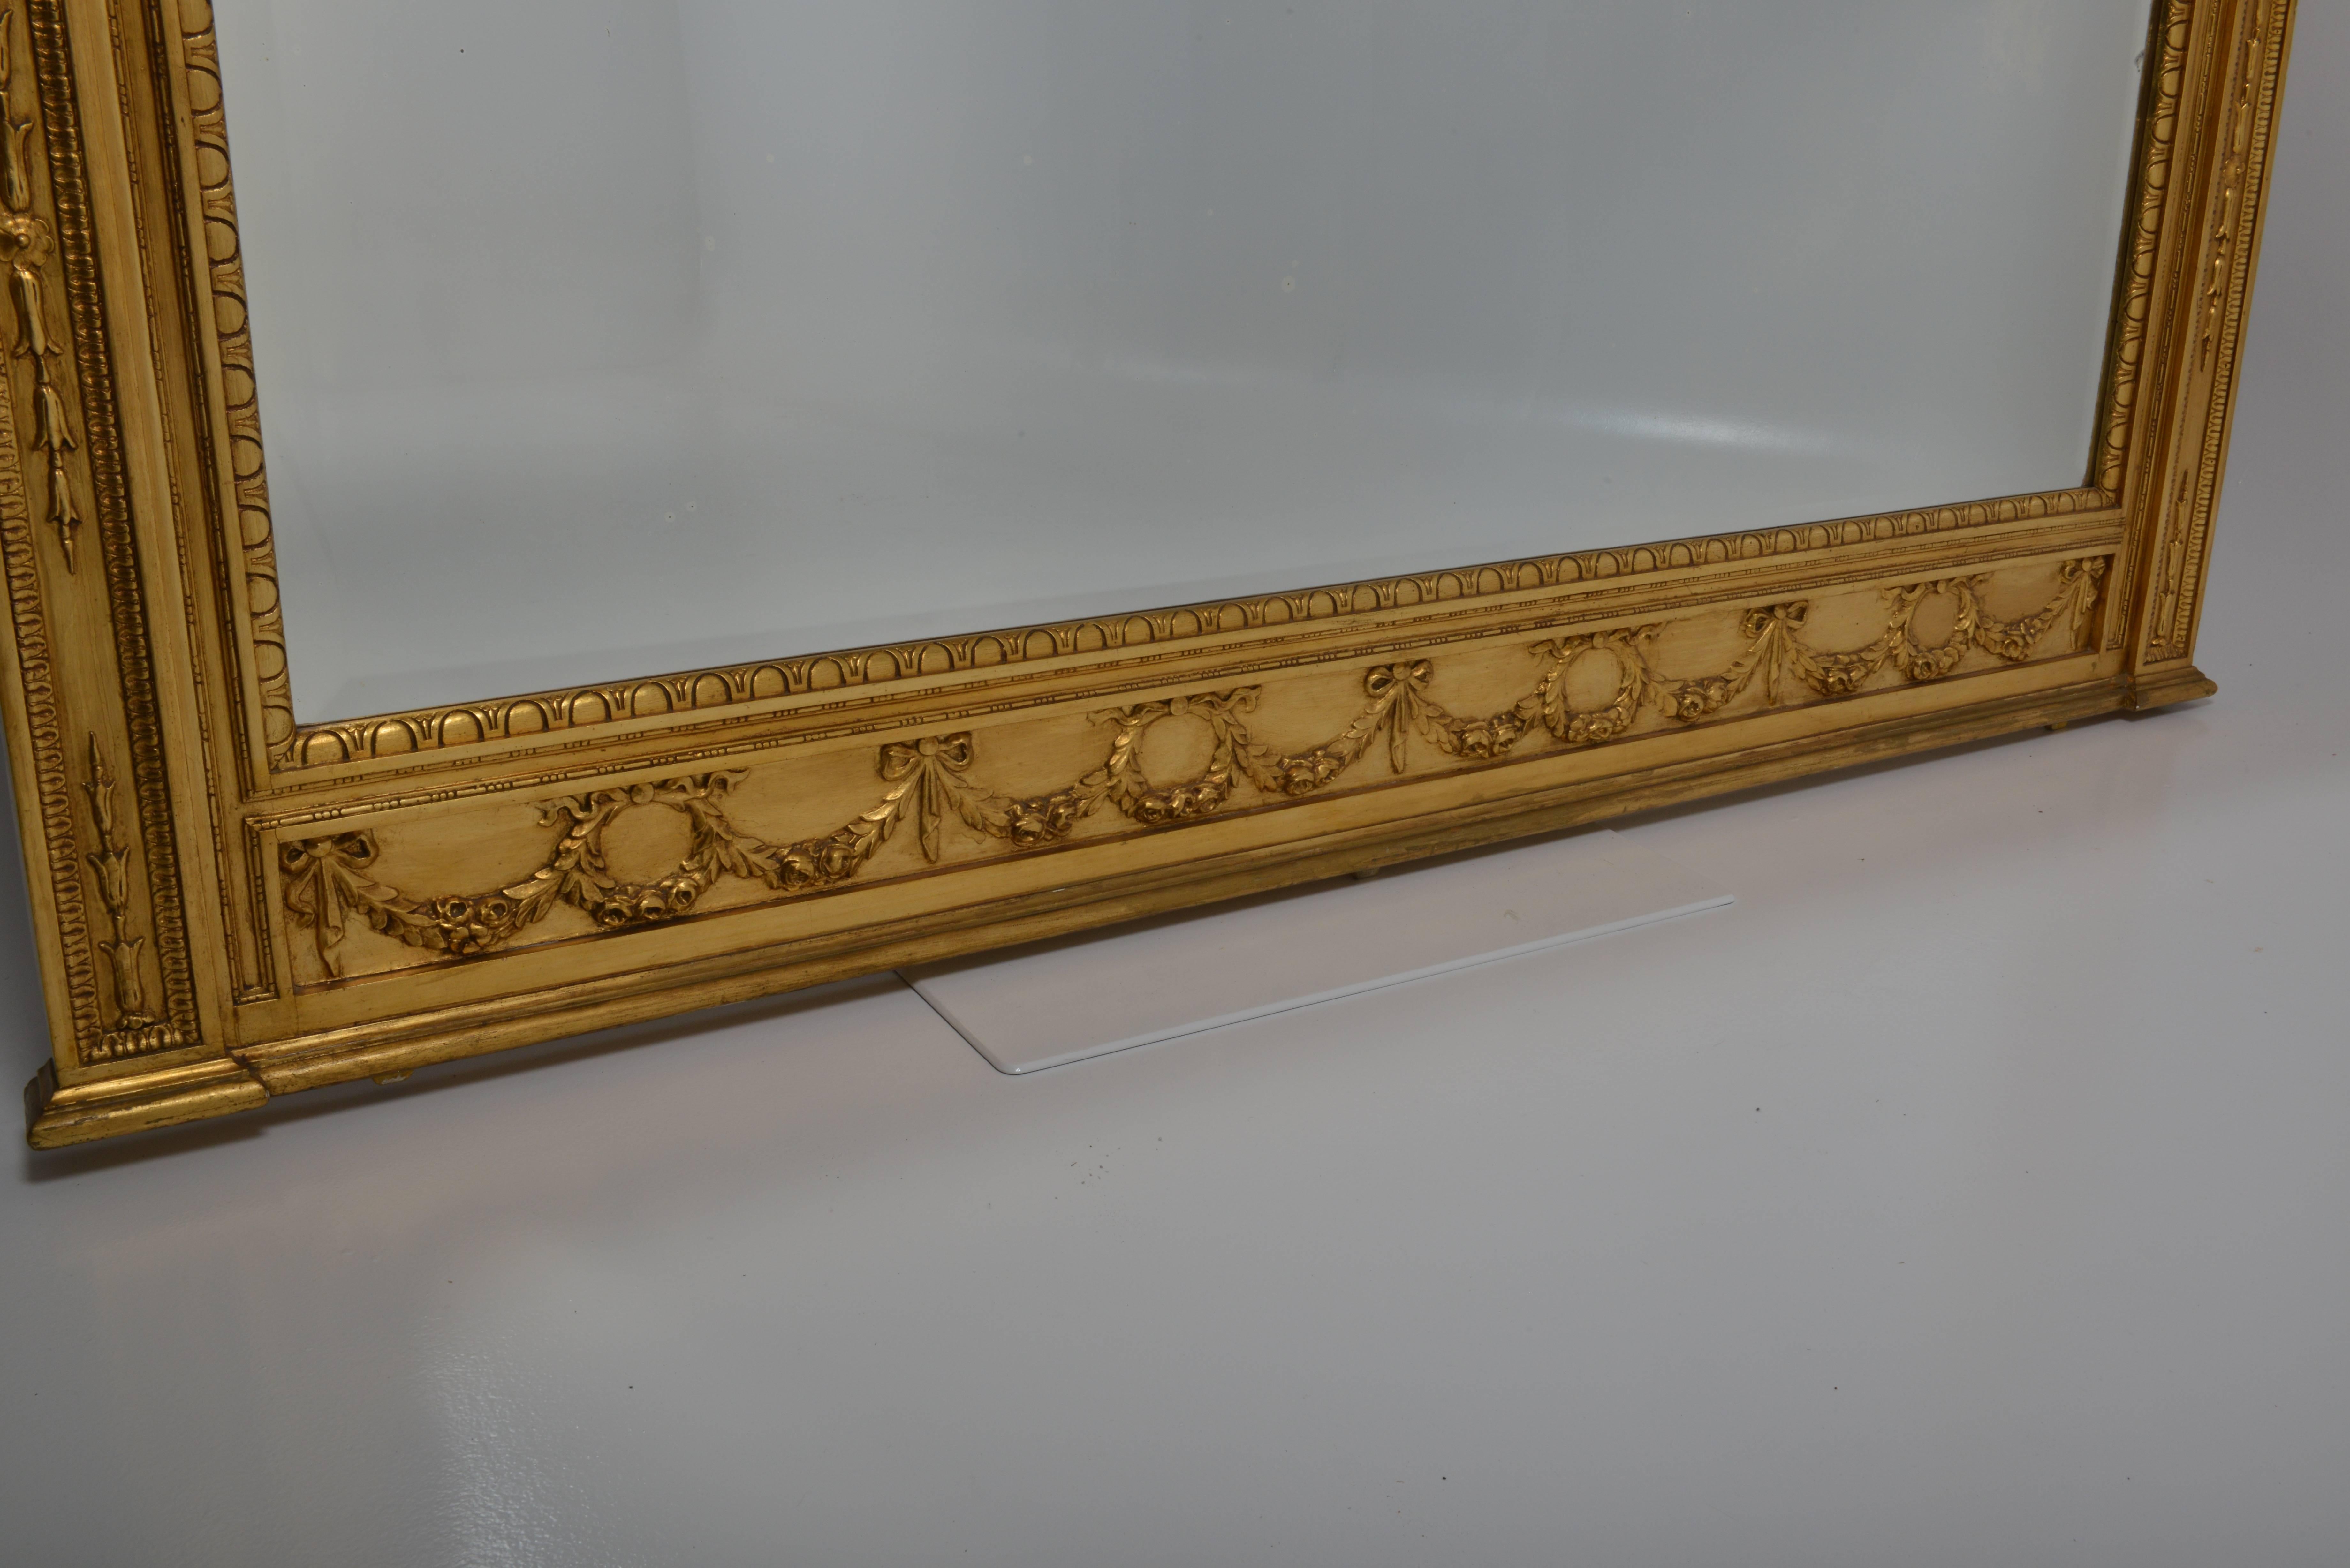 Italian second Empire style giltwood mirror with palmette decorations.